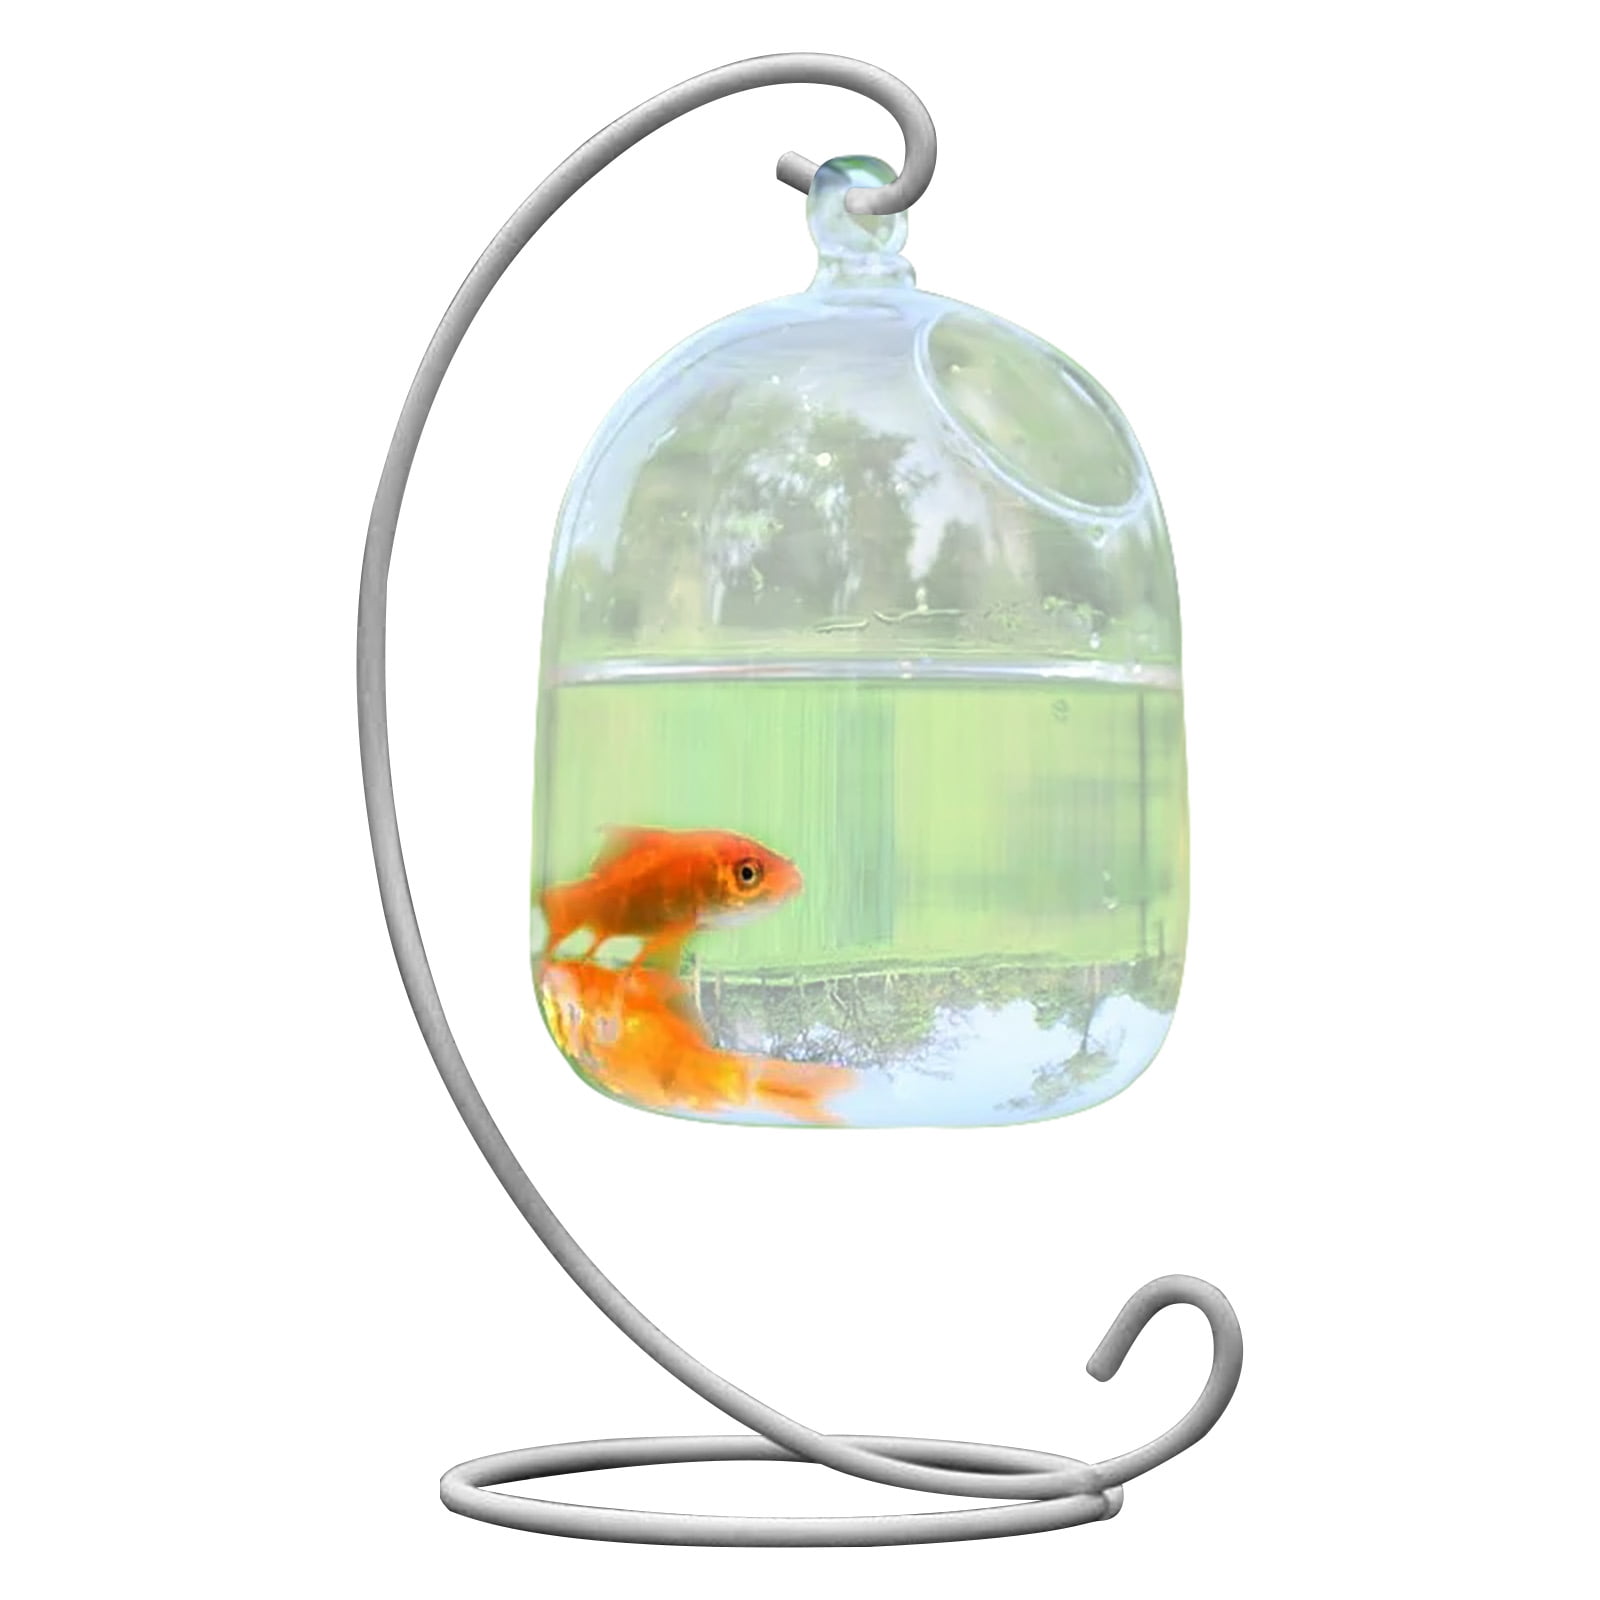 Hapeisy Desk Hanging Fish Tank Bowl with Stand, Small Table Top Glass Fish  Bowl Mini Aquarium for Betta Fish Home Decor (Without fish 